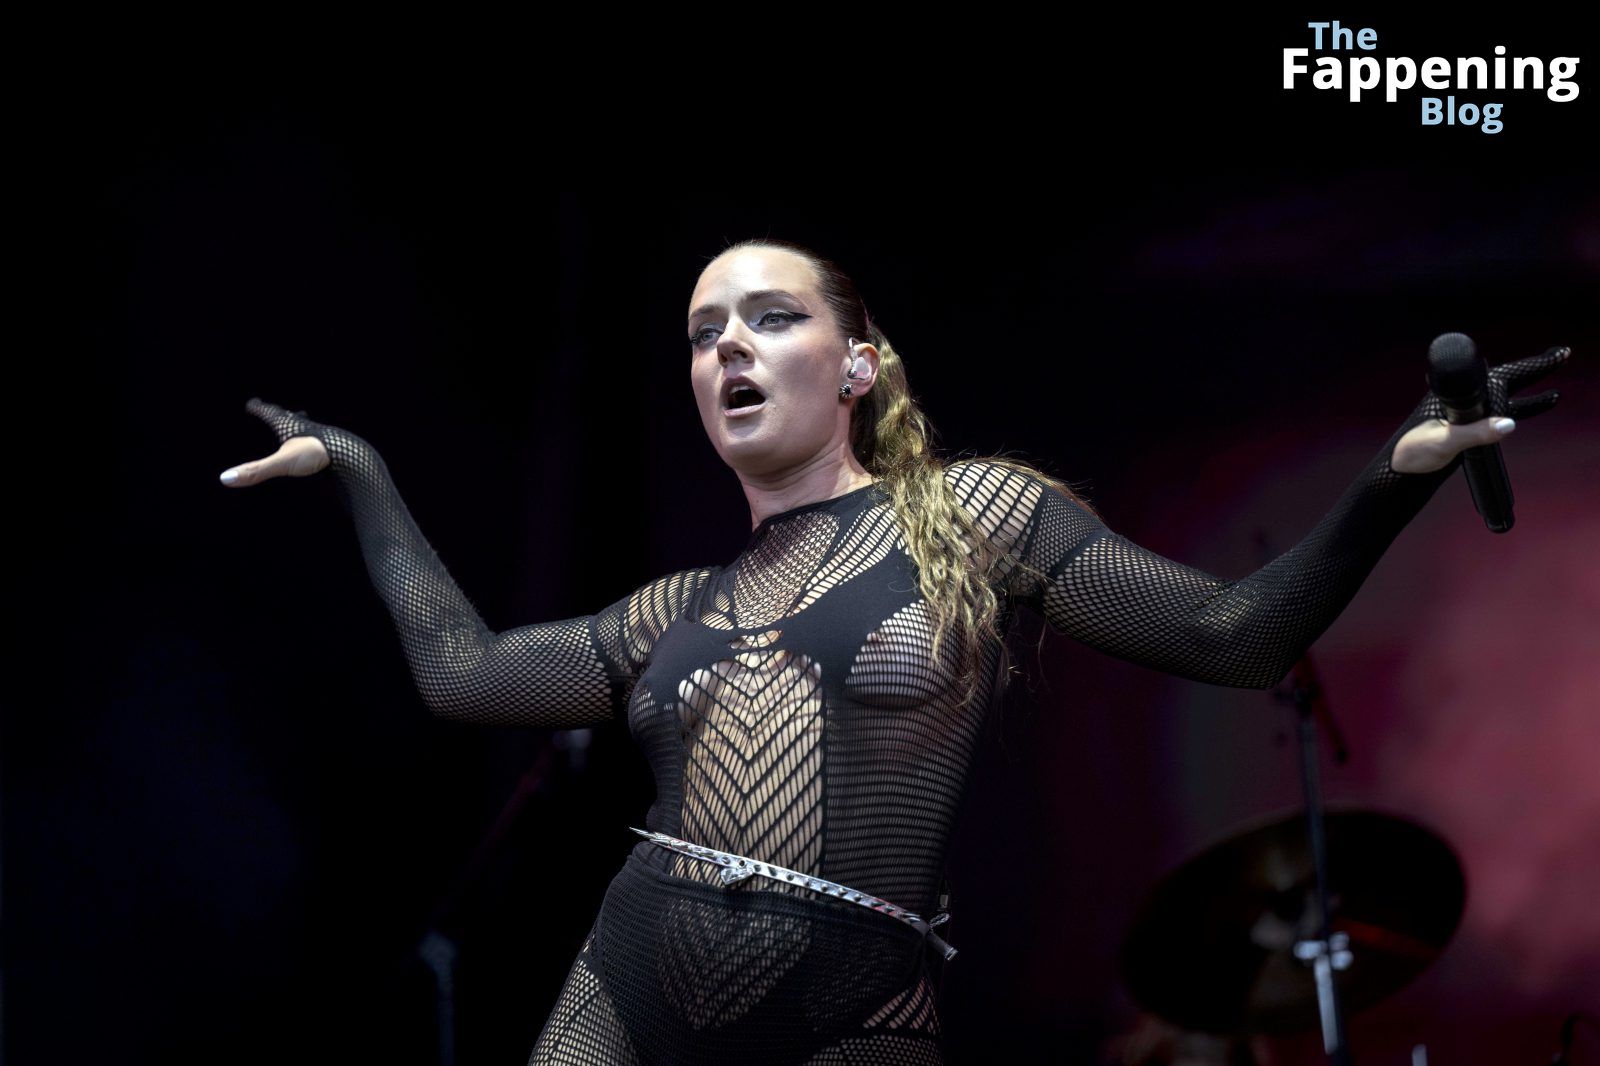 Tove-Lo-Way-Out-West-Festival-Sexy-Fishnet-Boobs-Nipples-6-1-thefappeningblog.com_.jpg